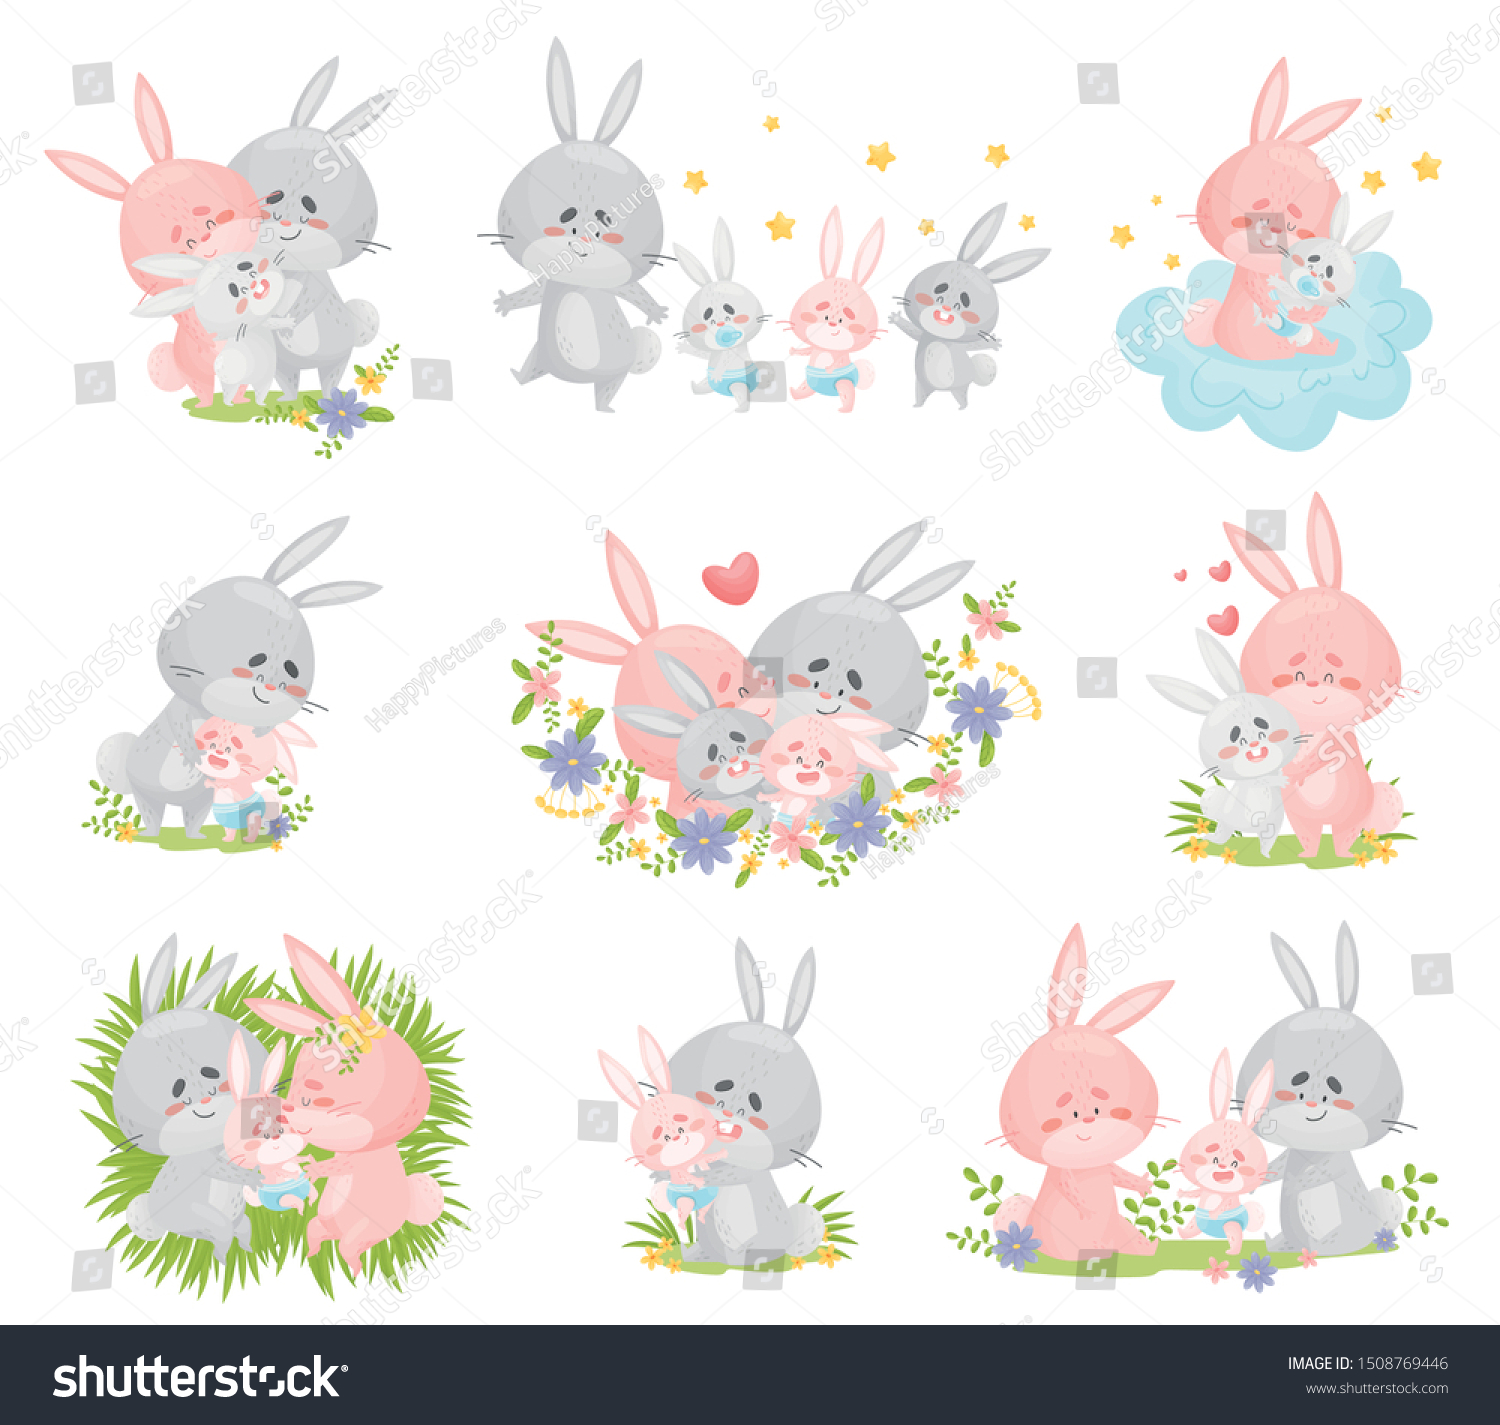 SVG of Set of images of a family of rabbits. Vector illustration on a white background. svg